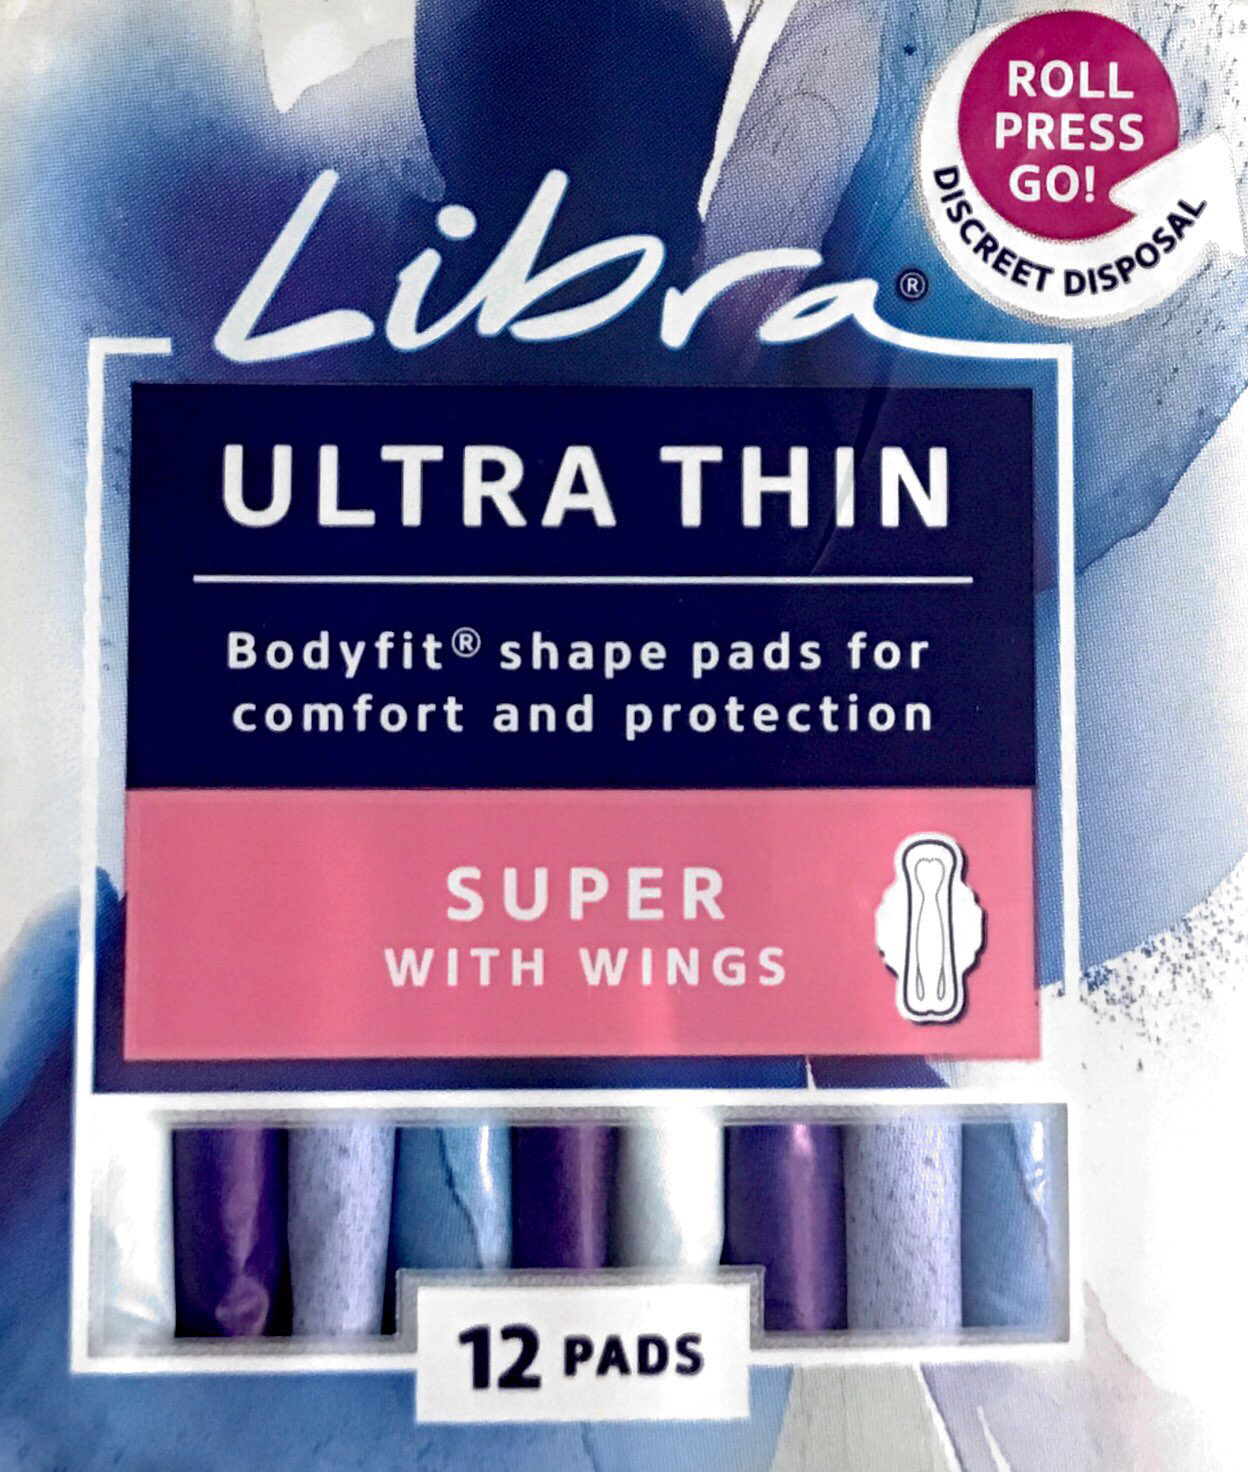 Libra Ultra thin super with wings - Pads 12